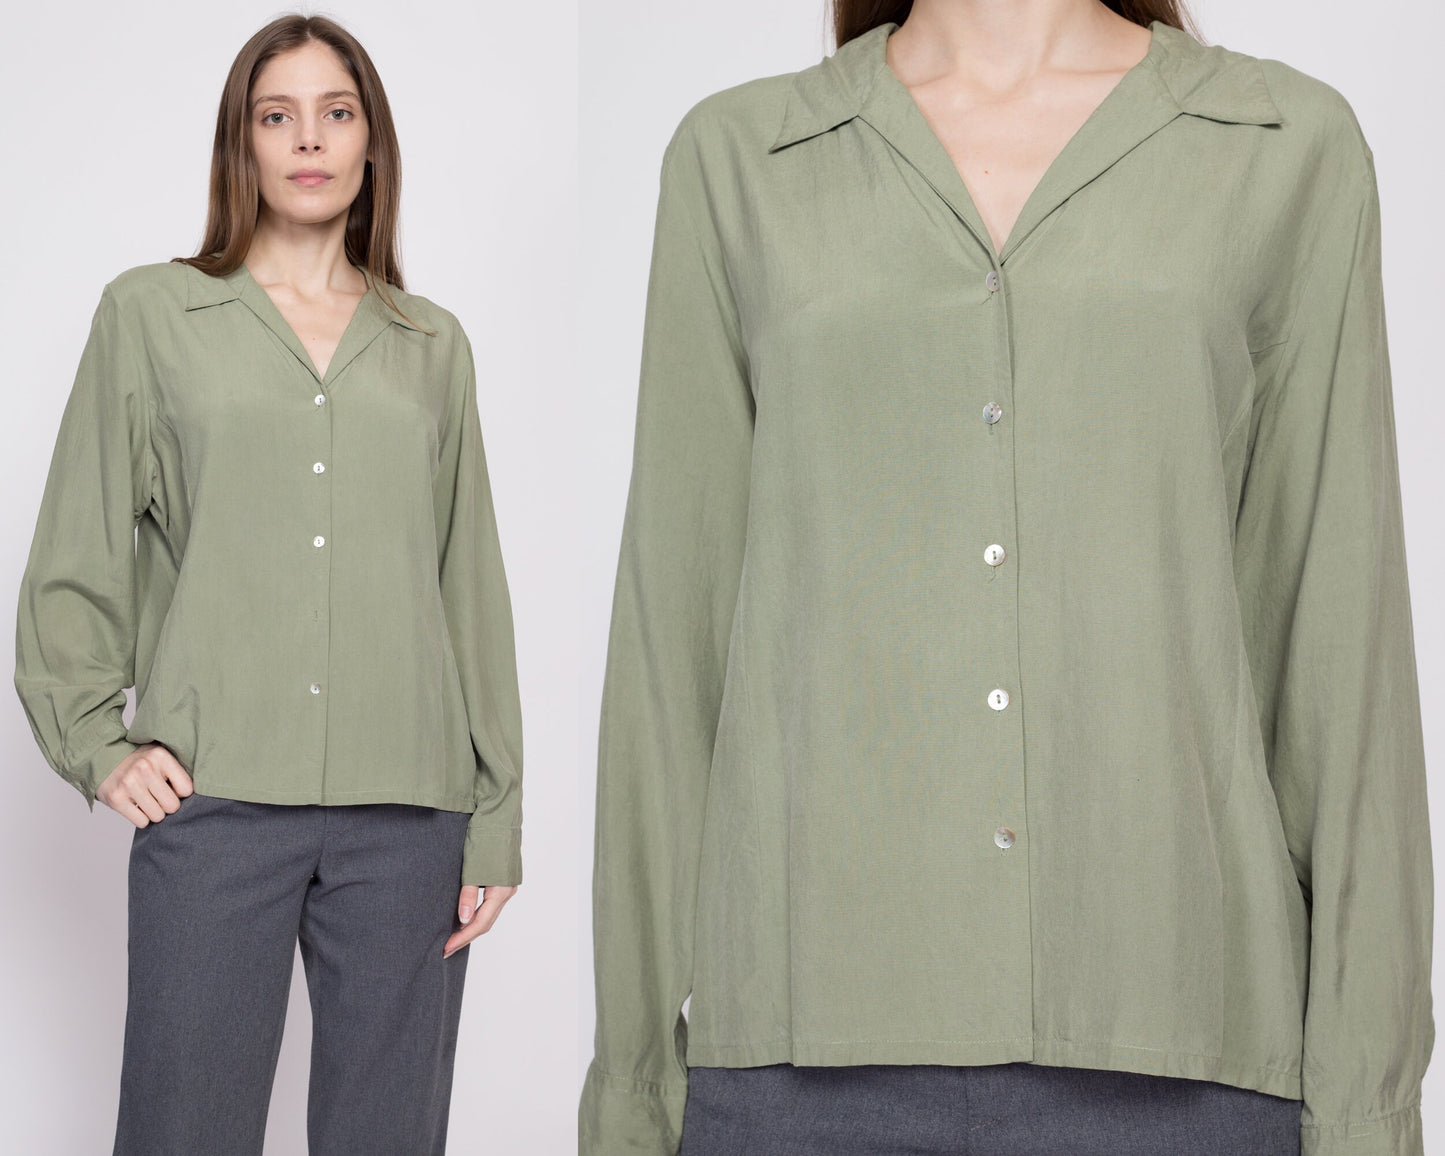 90s Sage Green Silk Blouse - Extra Large | Vintage Minimalist Long Sleeve Button Up Collared Shirt